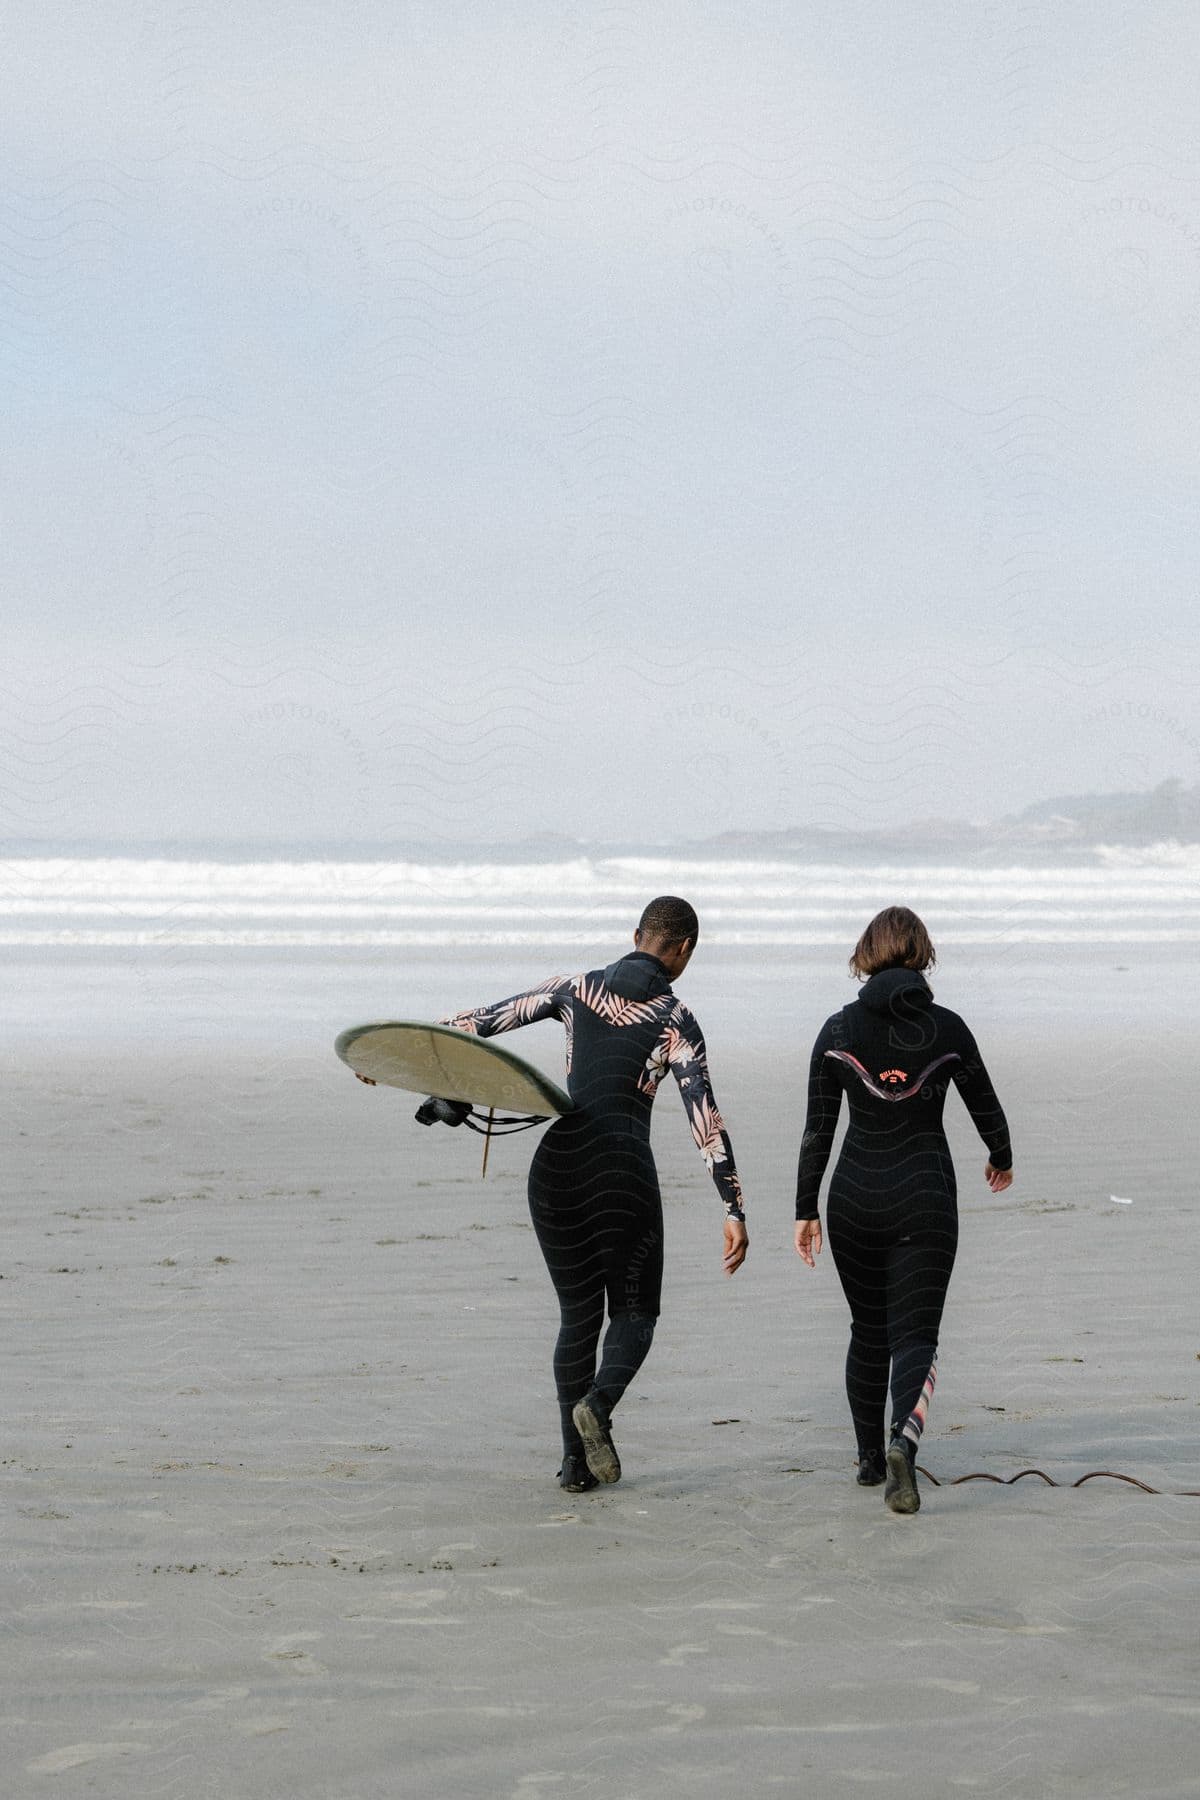 Two people walking on a beach by the sea in tofino british columbia